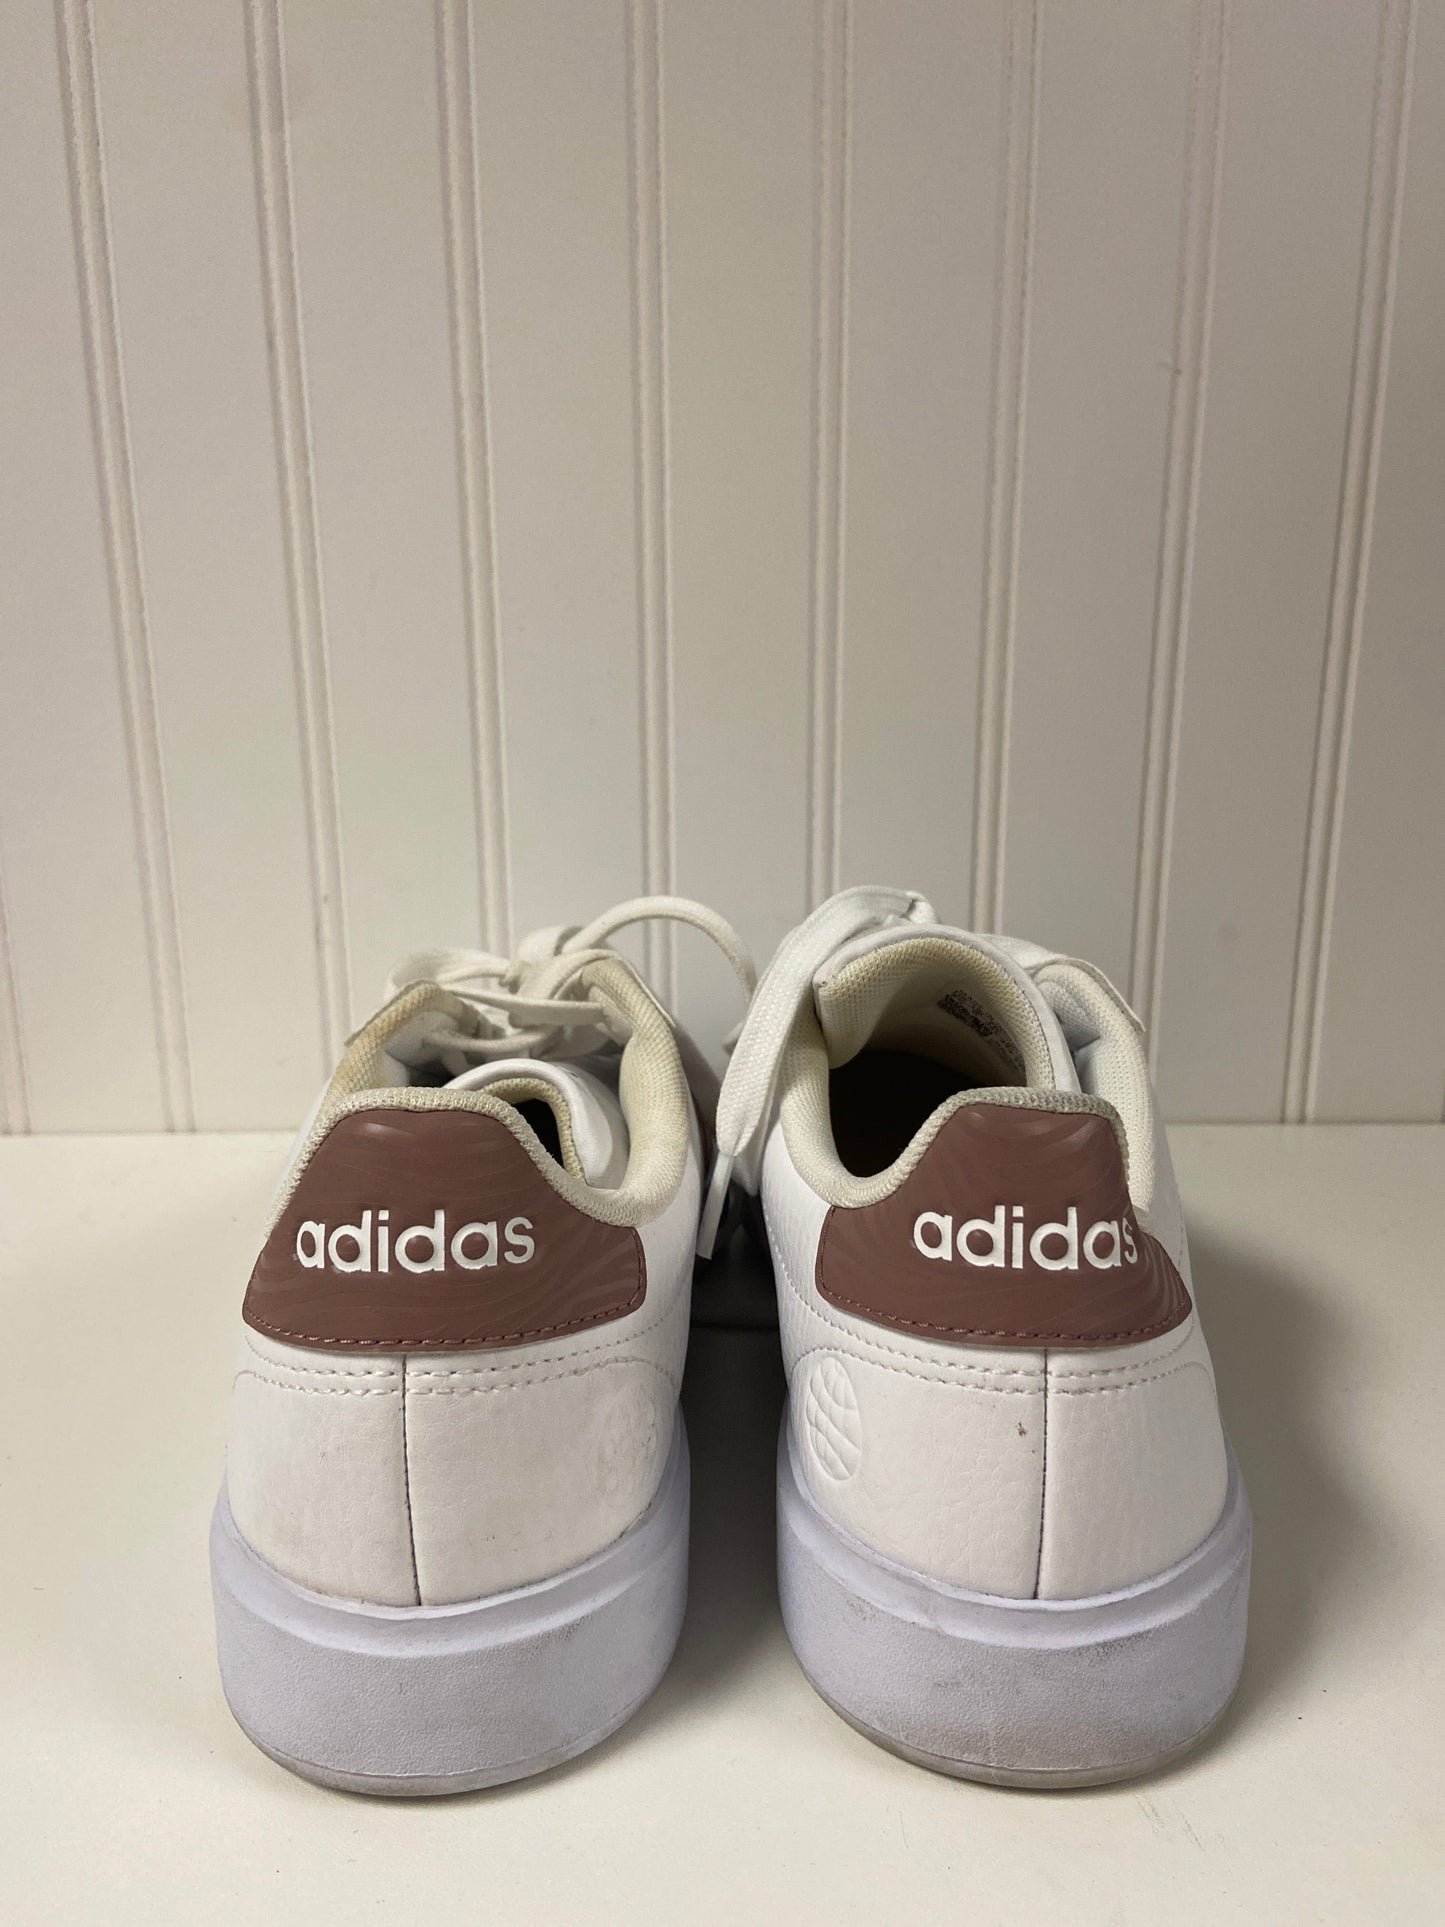 White Shoes Sneakers Adidas, Size 7.5